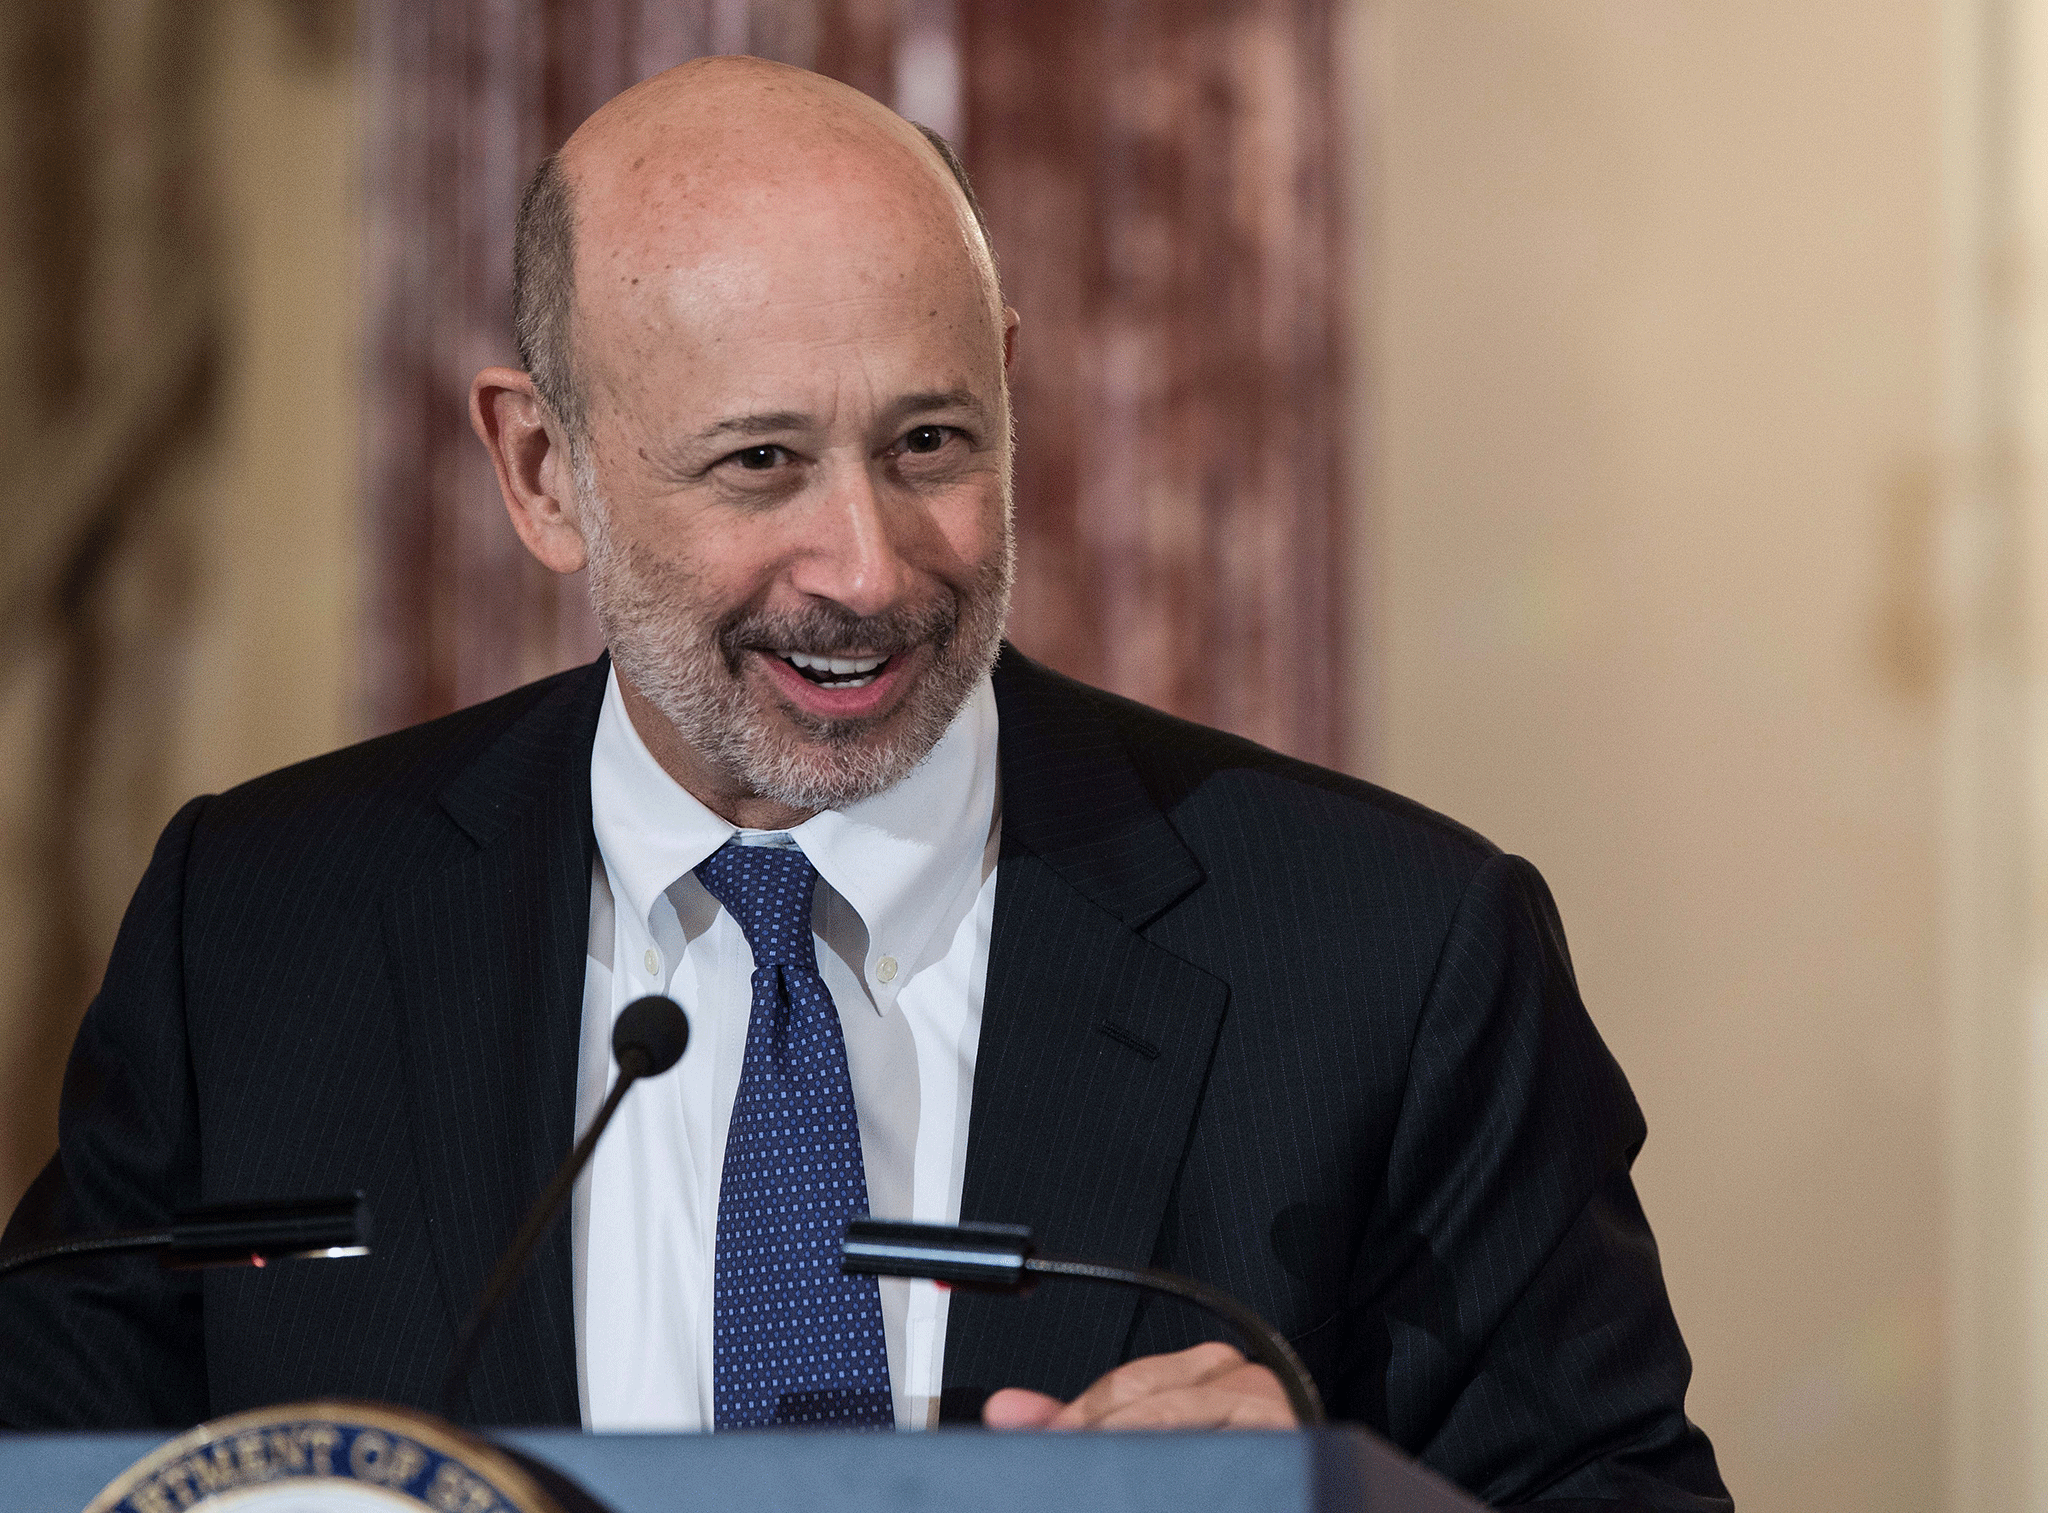 Goldman Sachs CEO slams state of the US in solar eclipse tweet